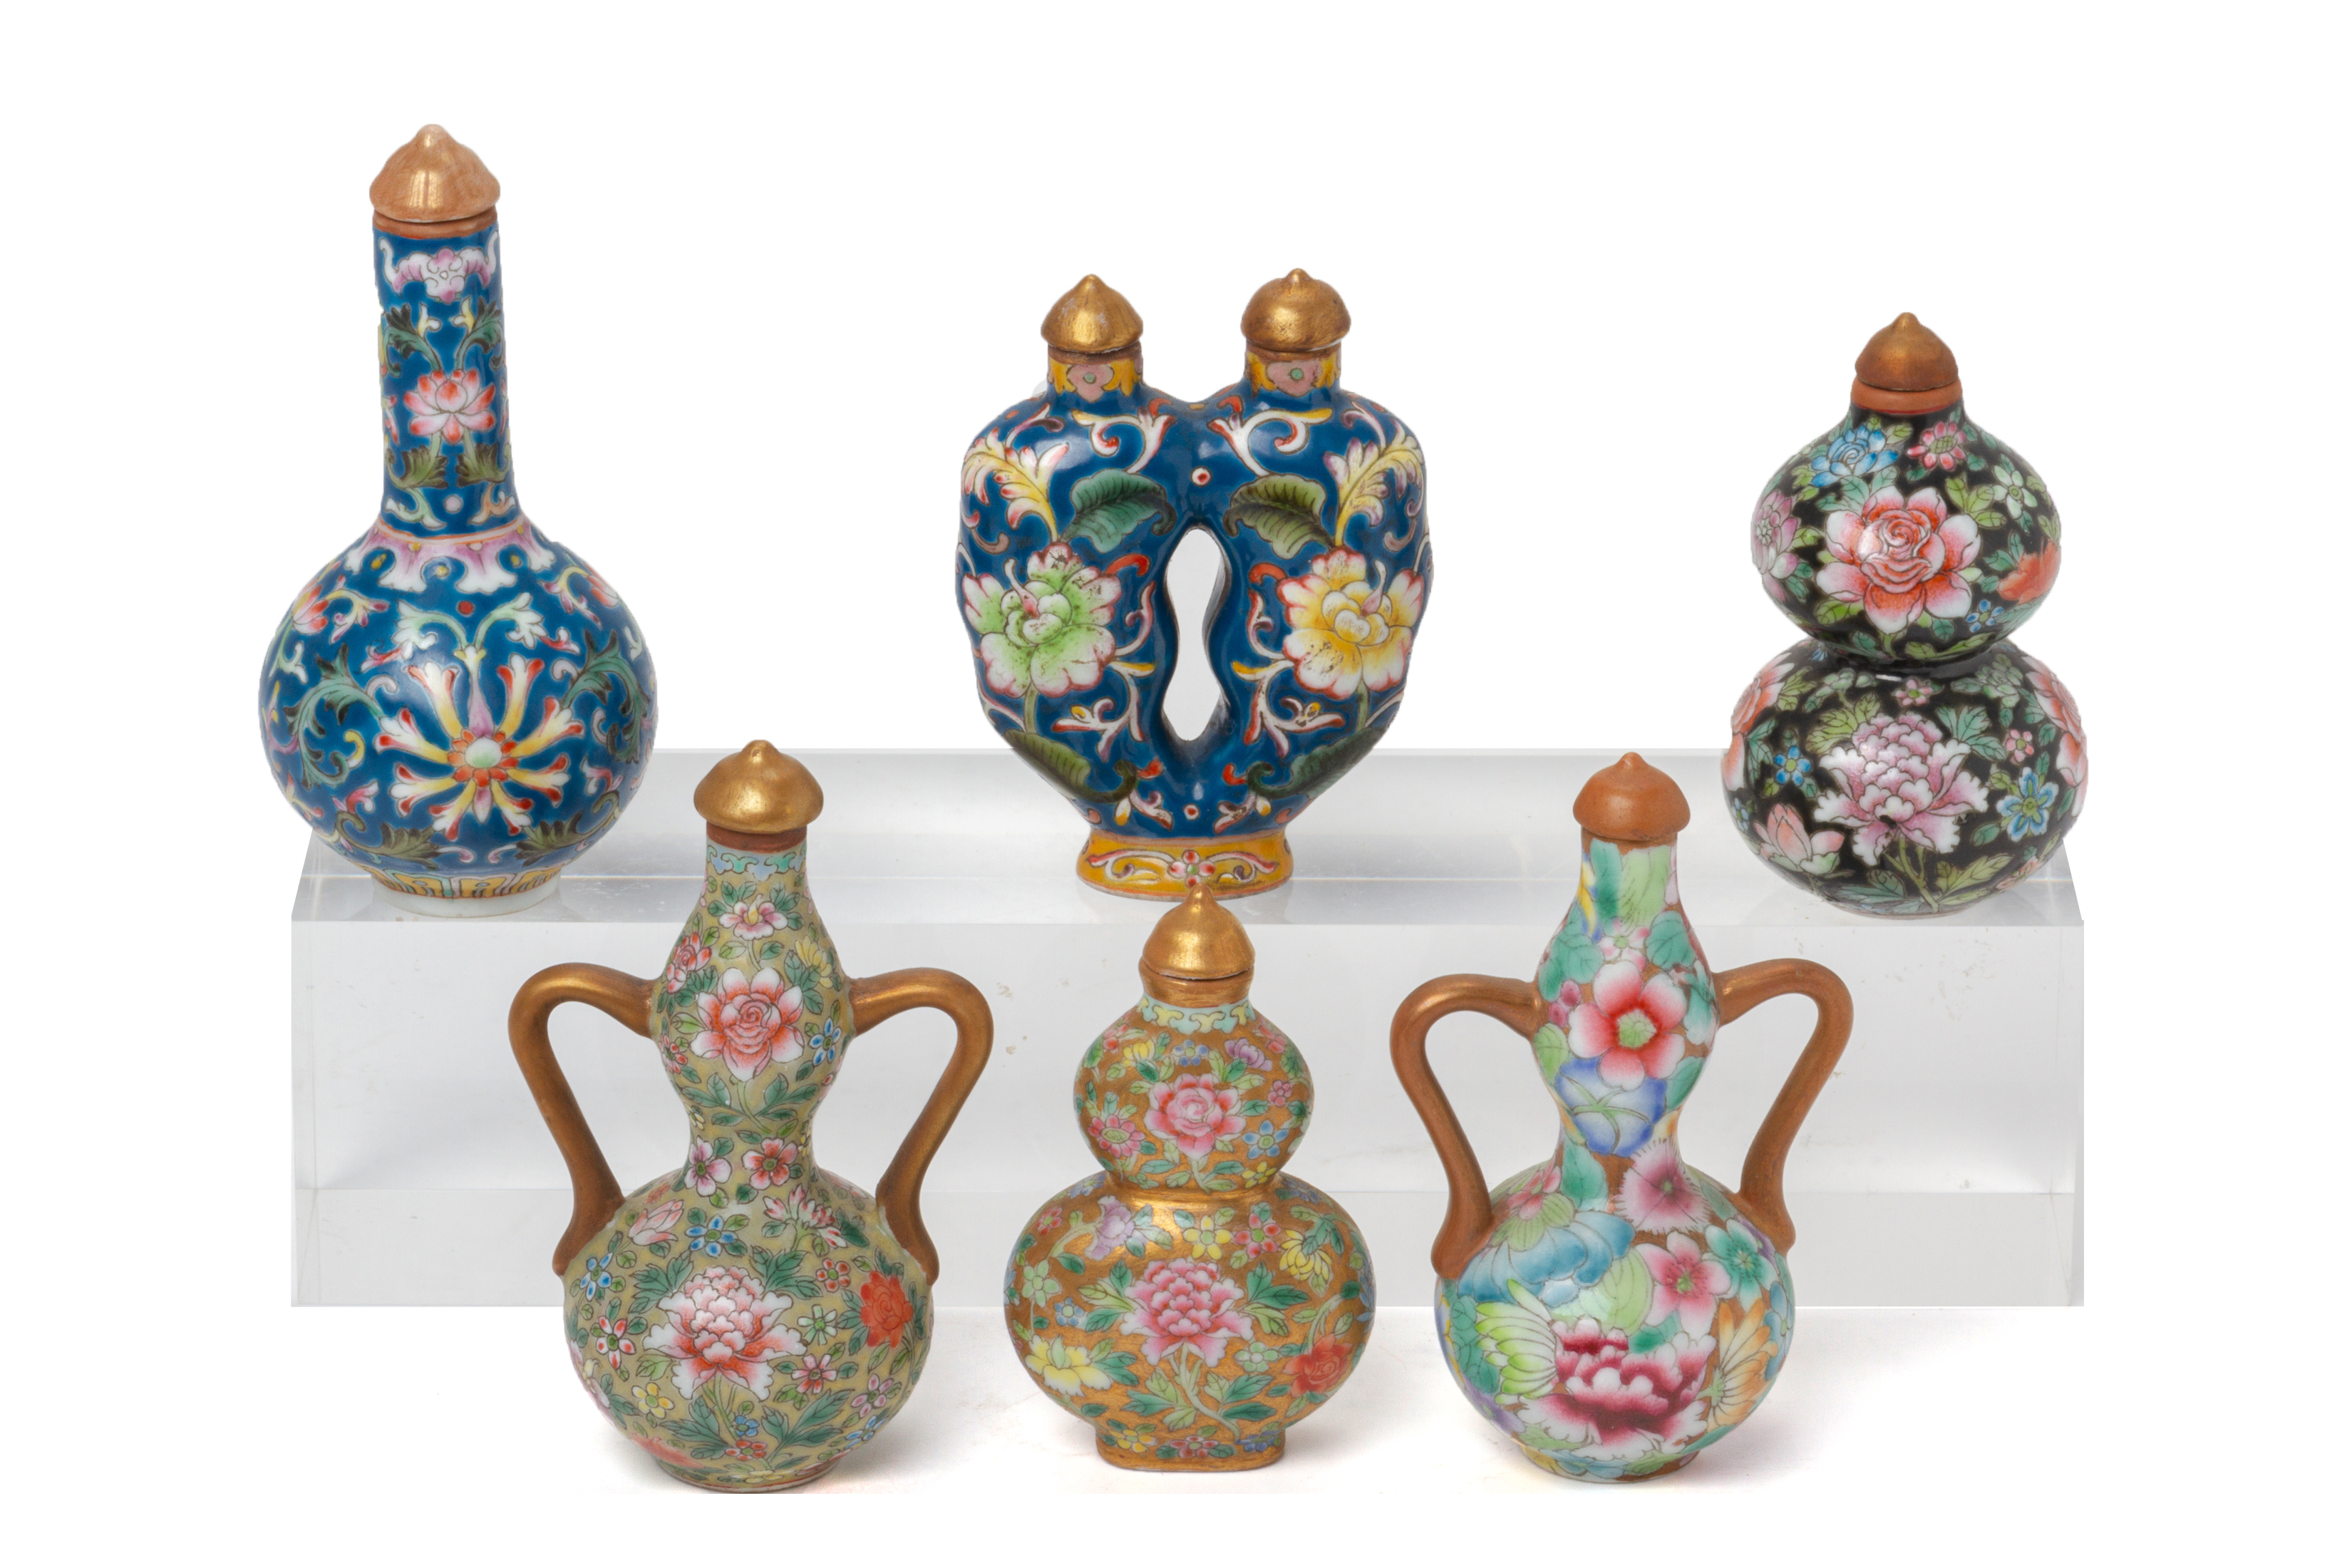 A GROUP OF SIX POLYCHROME ENAMELLED PORCELAIN SNUFF BOTTLES - Image 2 of 2